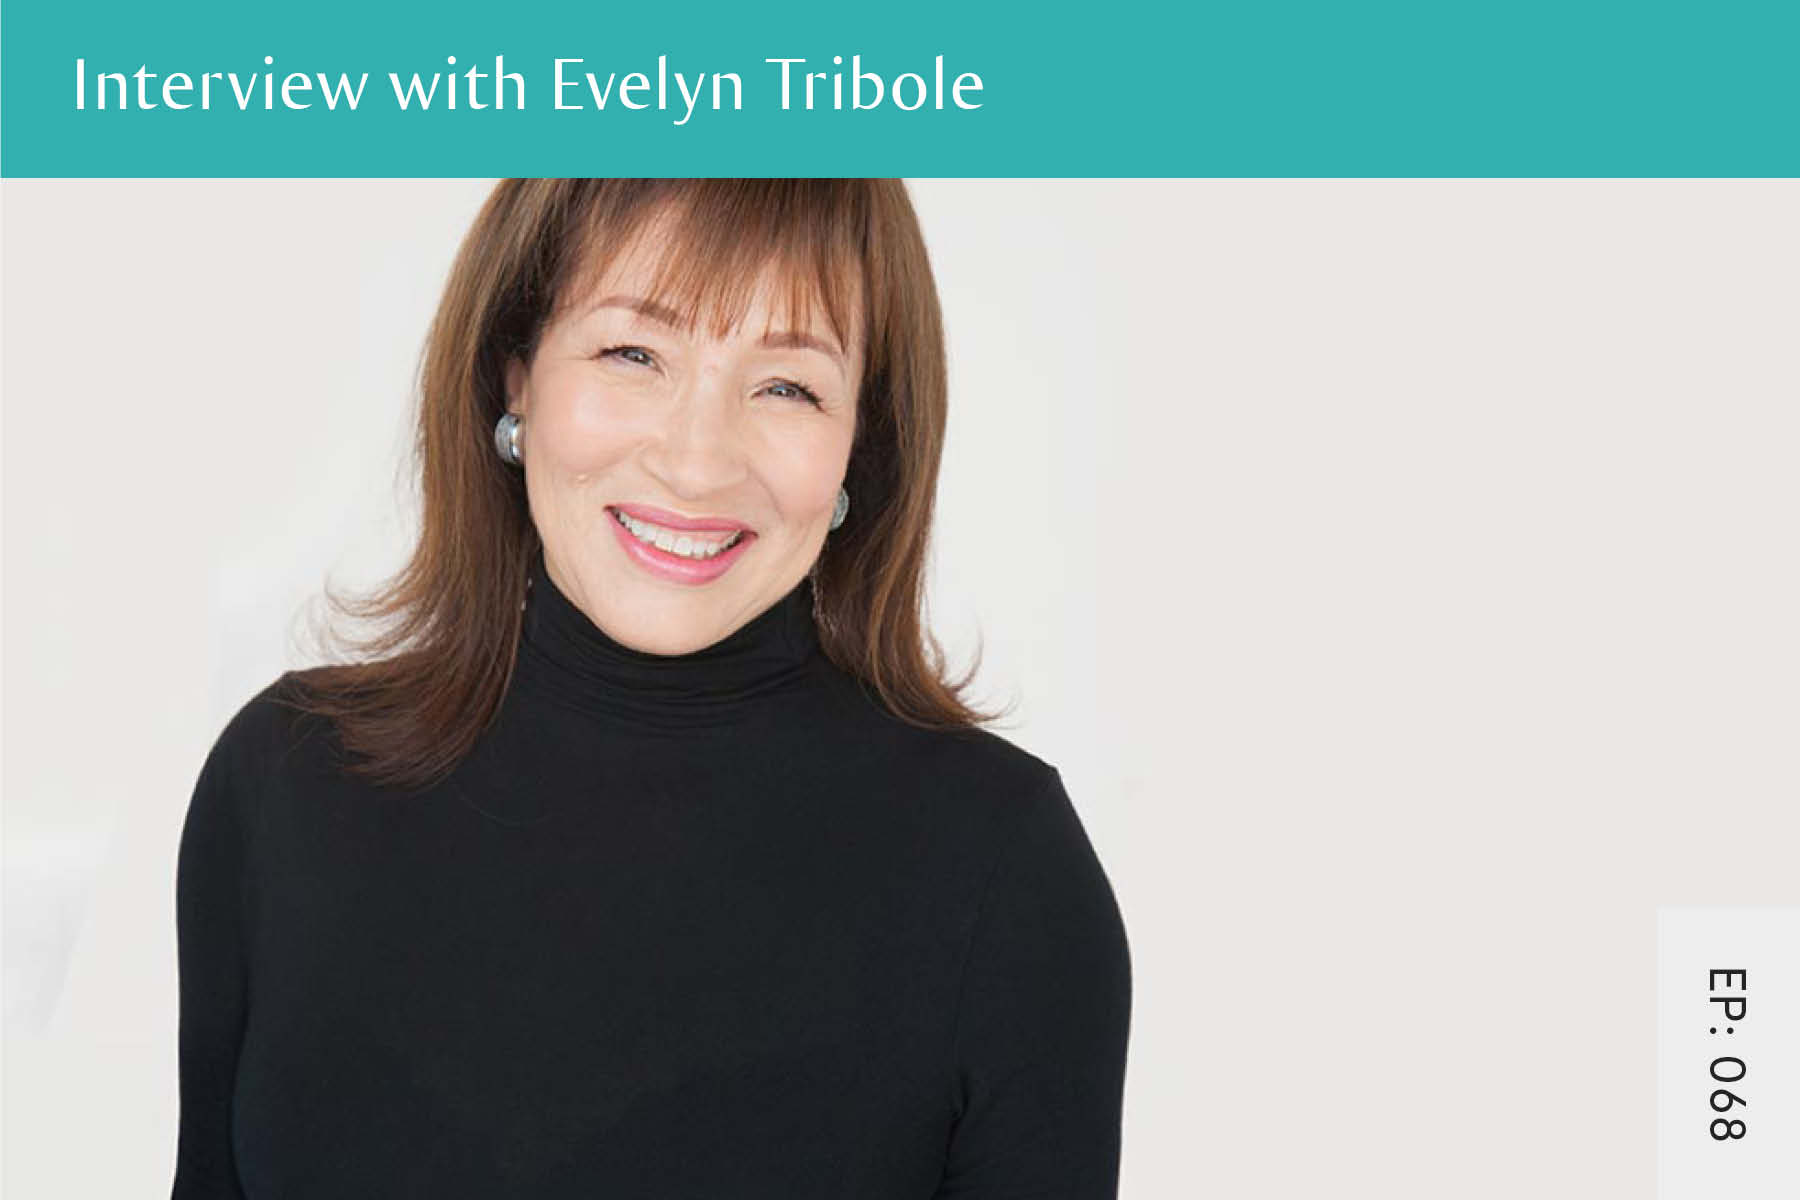 intuitive eating by evelyn tribole